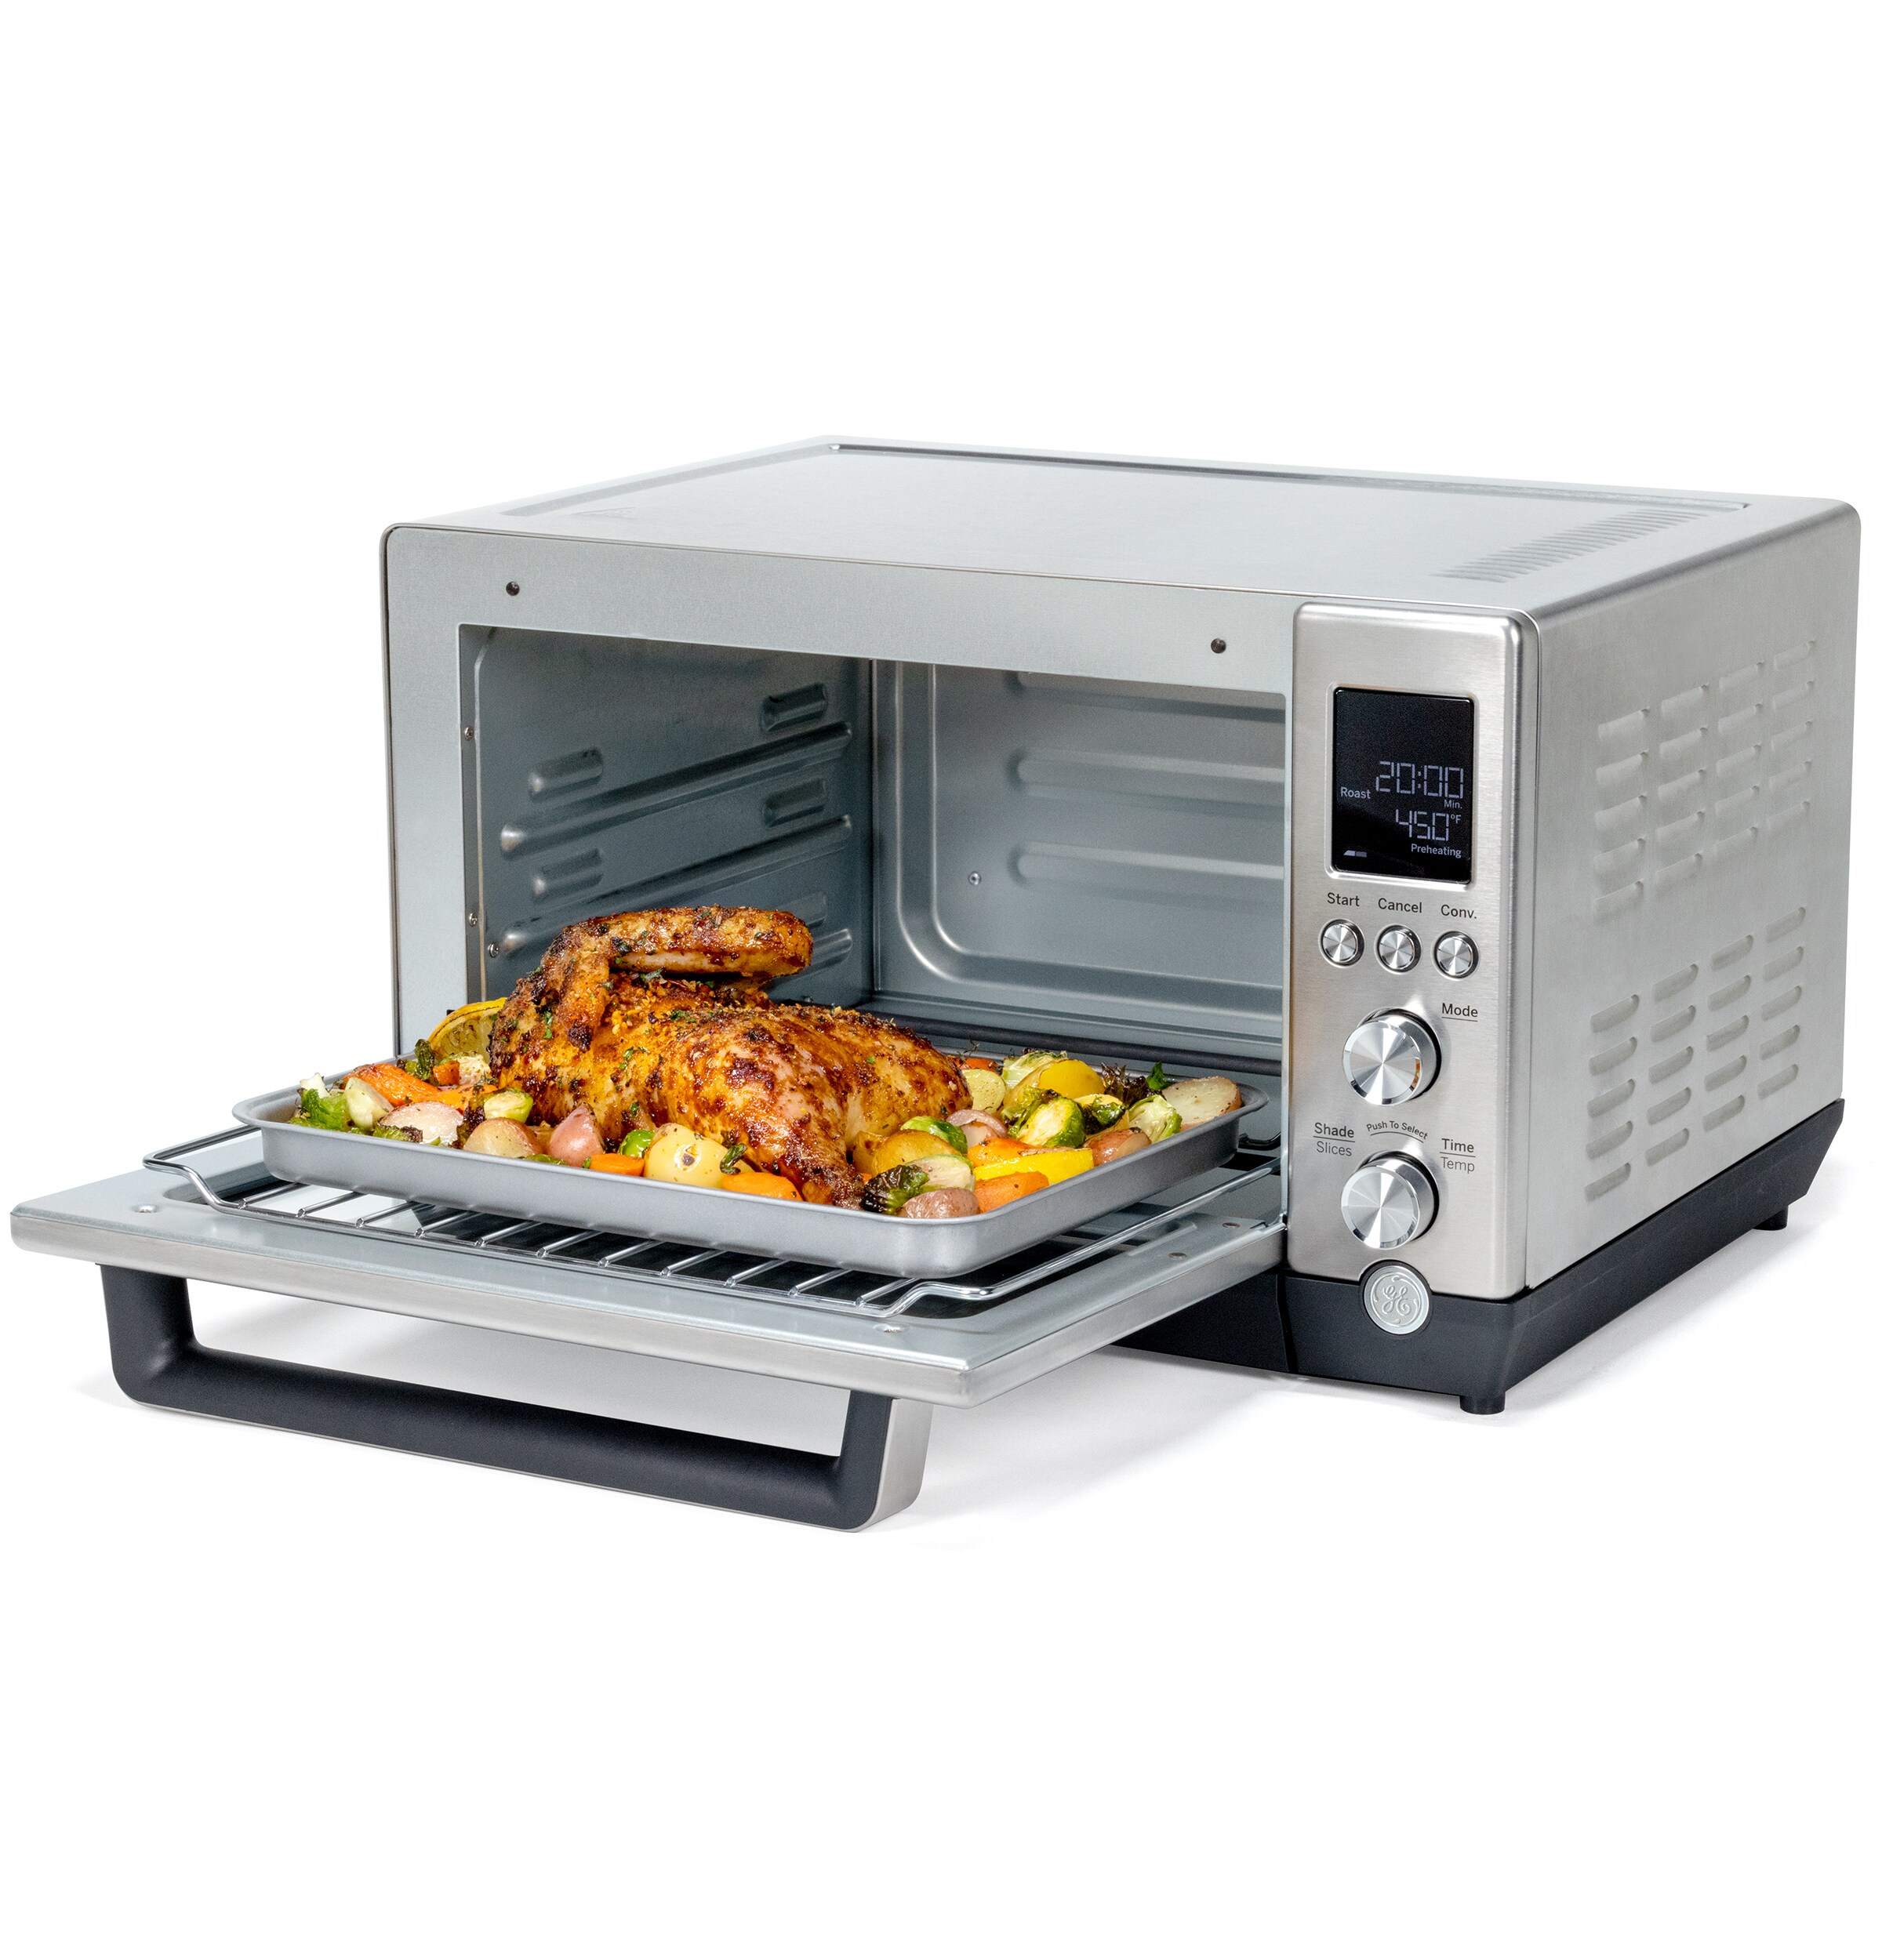 GE Rotisserie Convection Toaster Oven 169220 53 Review